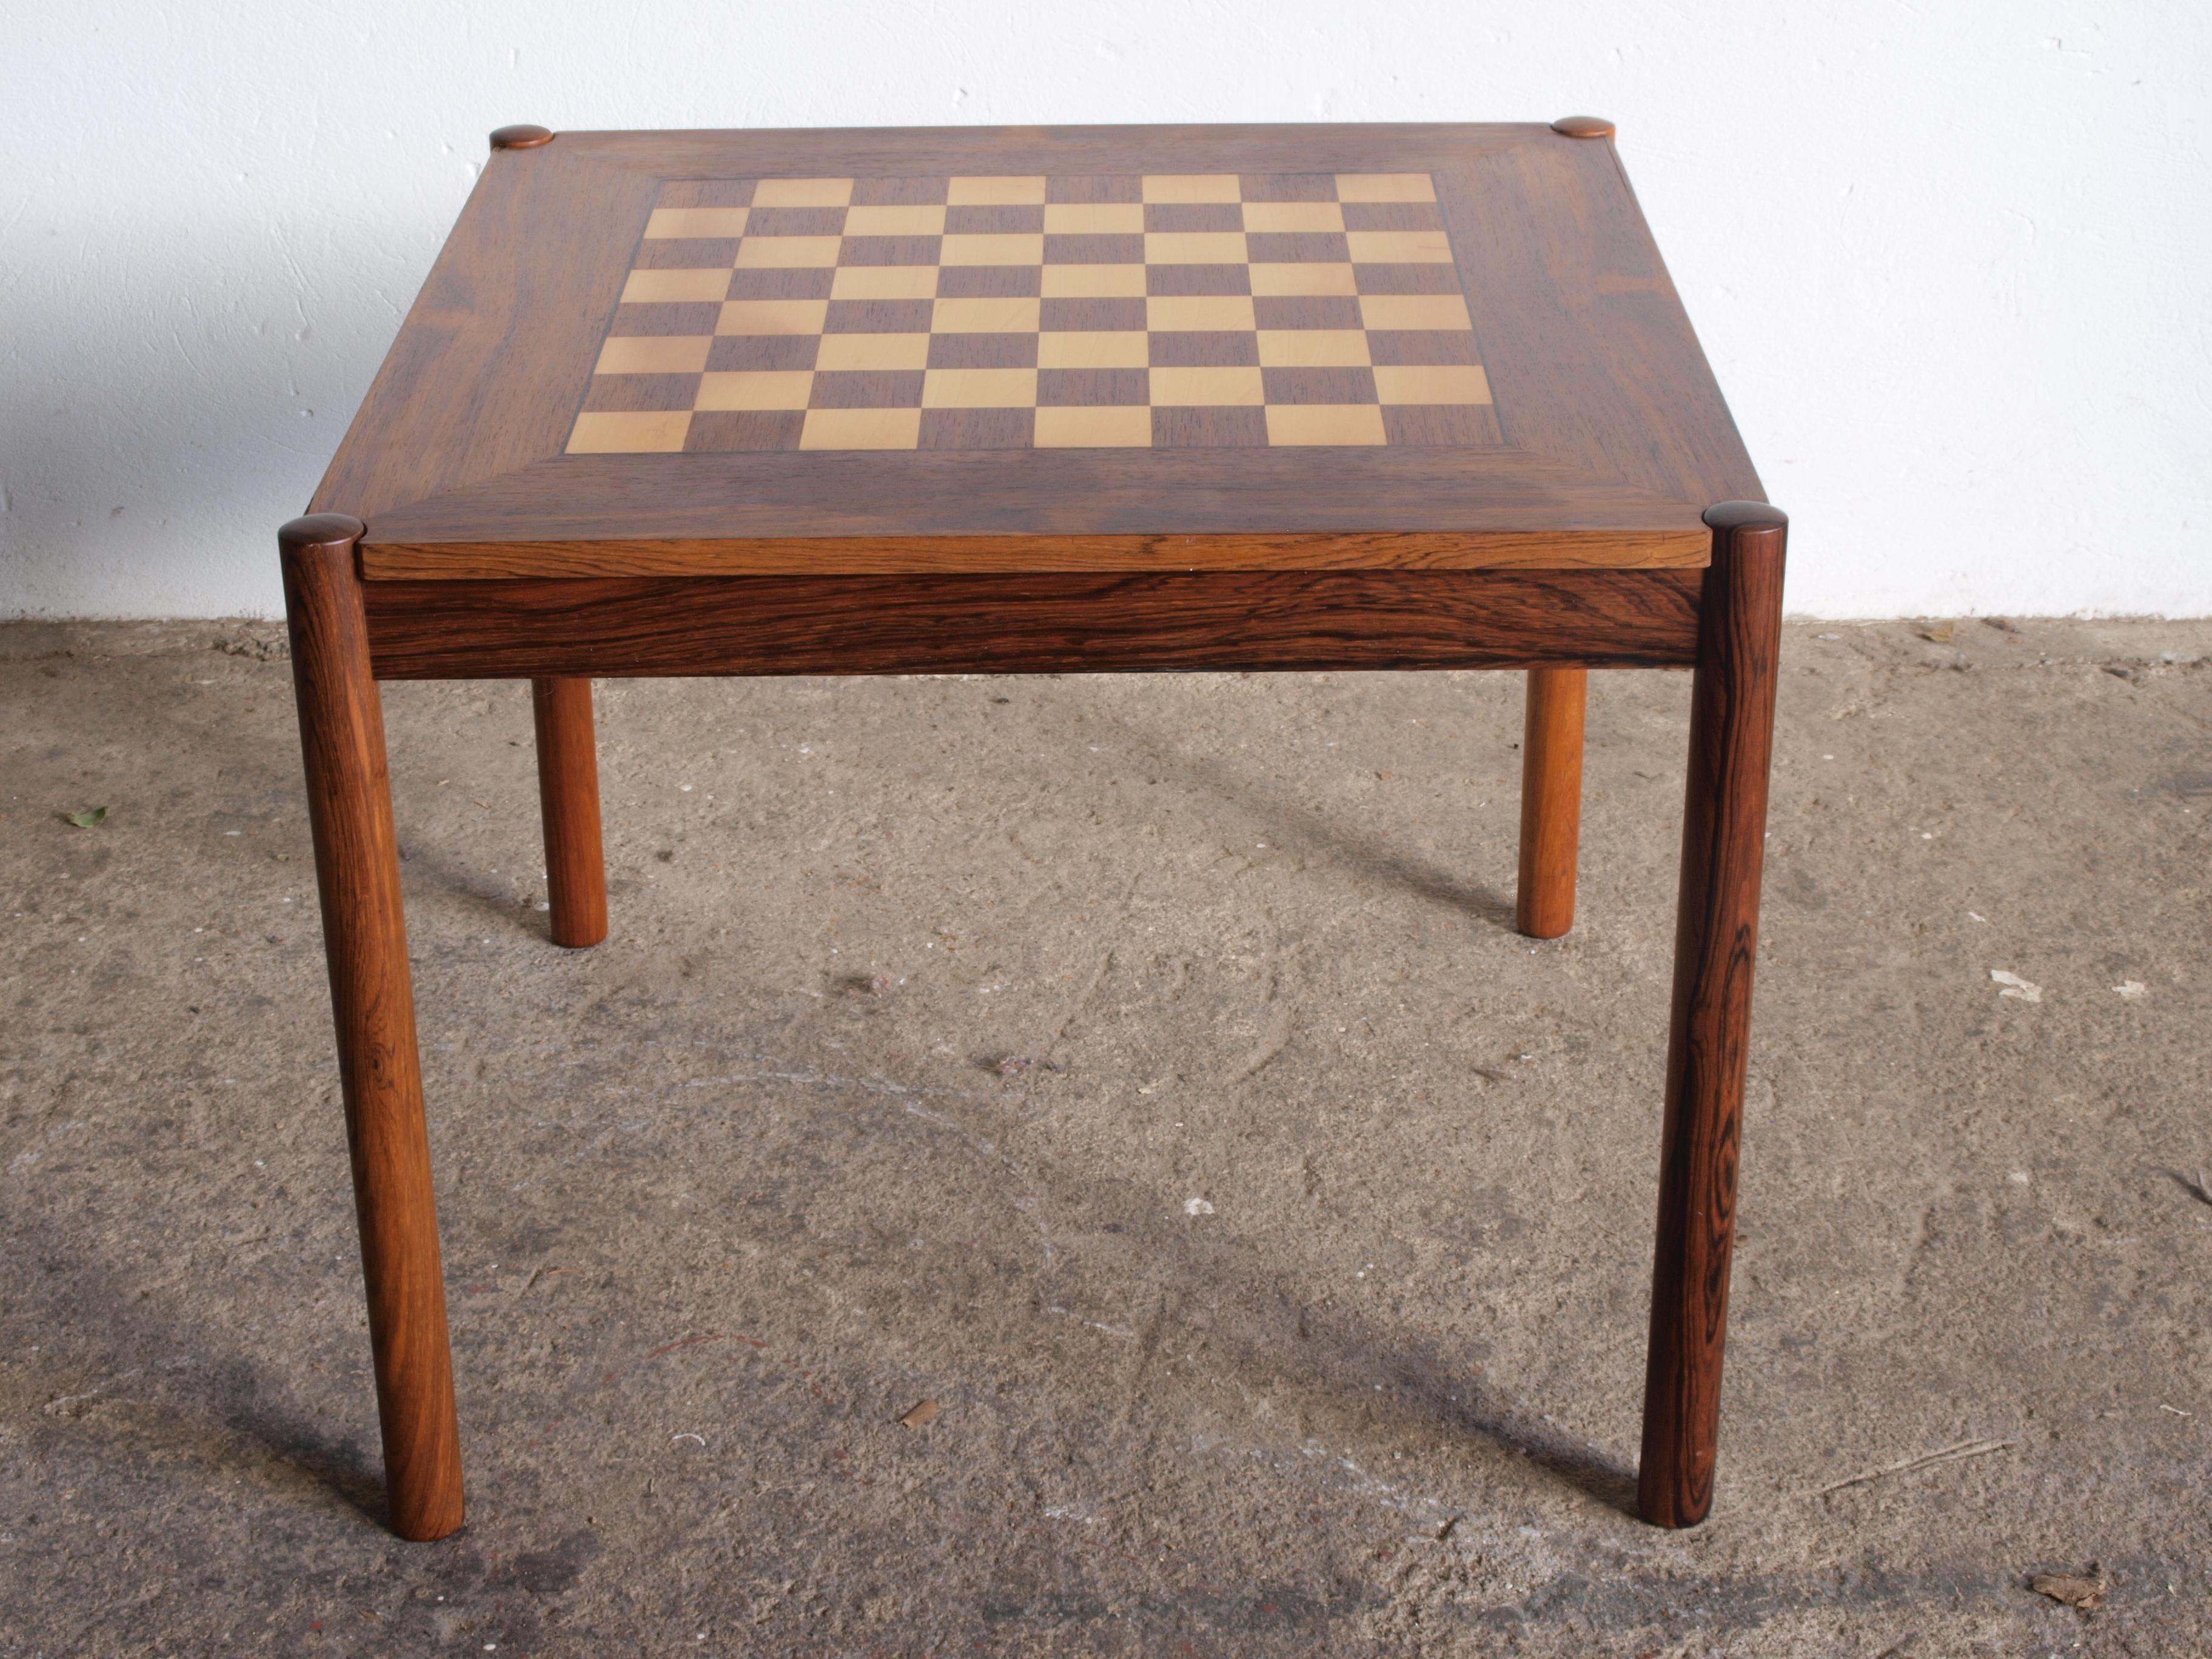 Beautiful rosewood chessboard gaming table from the 1950s/1960s. The table has a small imperfection, please refer to the pictures. However, on the chess side, it is hardly noticeable. Everything is otherwise in very good condition, with a small